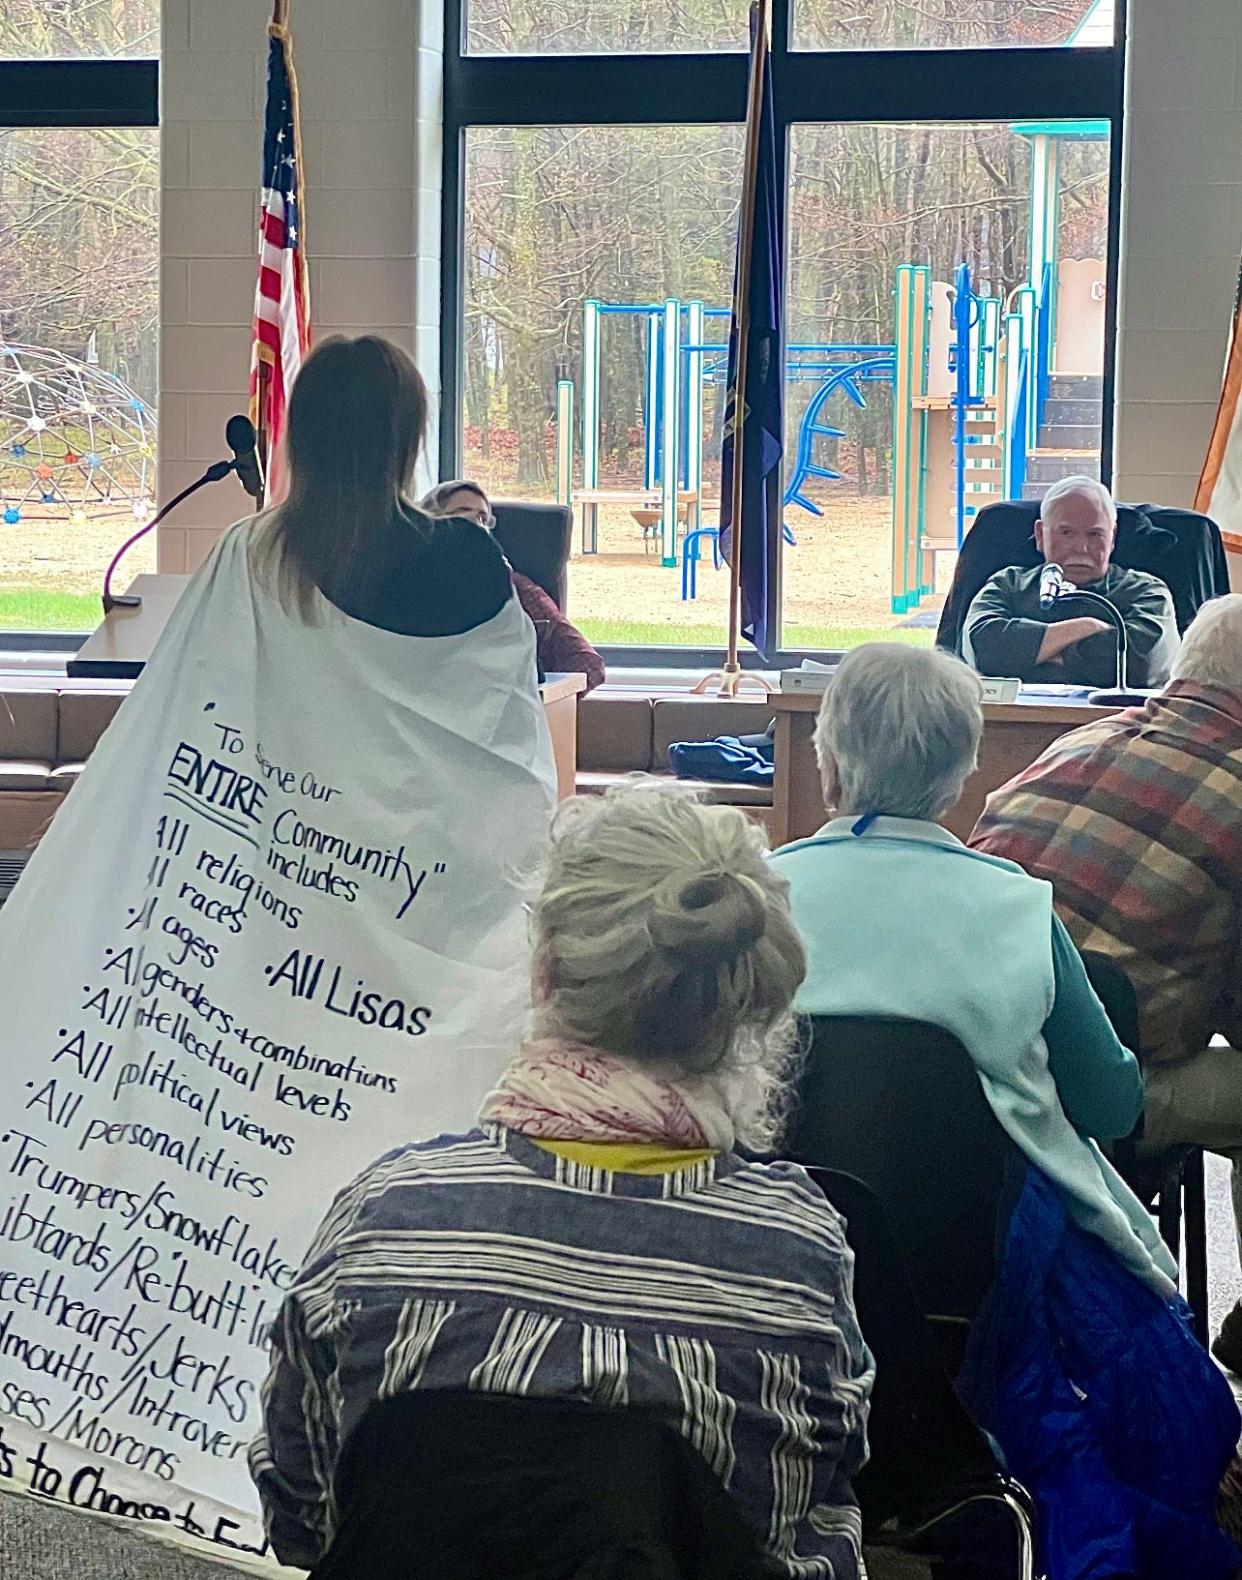 An audience member at the Health Department of Northwest Michigan Board of Health meeting on May 2 donned a cape with a message during the recess when staff consulted their attorney for advice on whether to move on without an approved agenda.